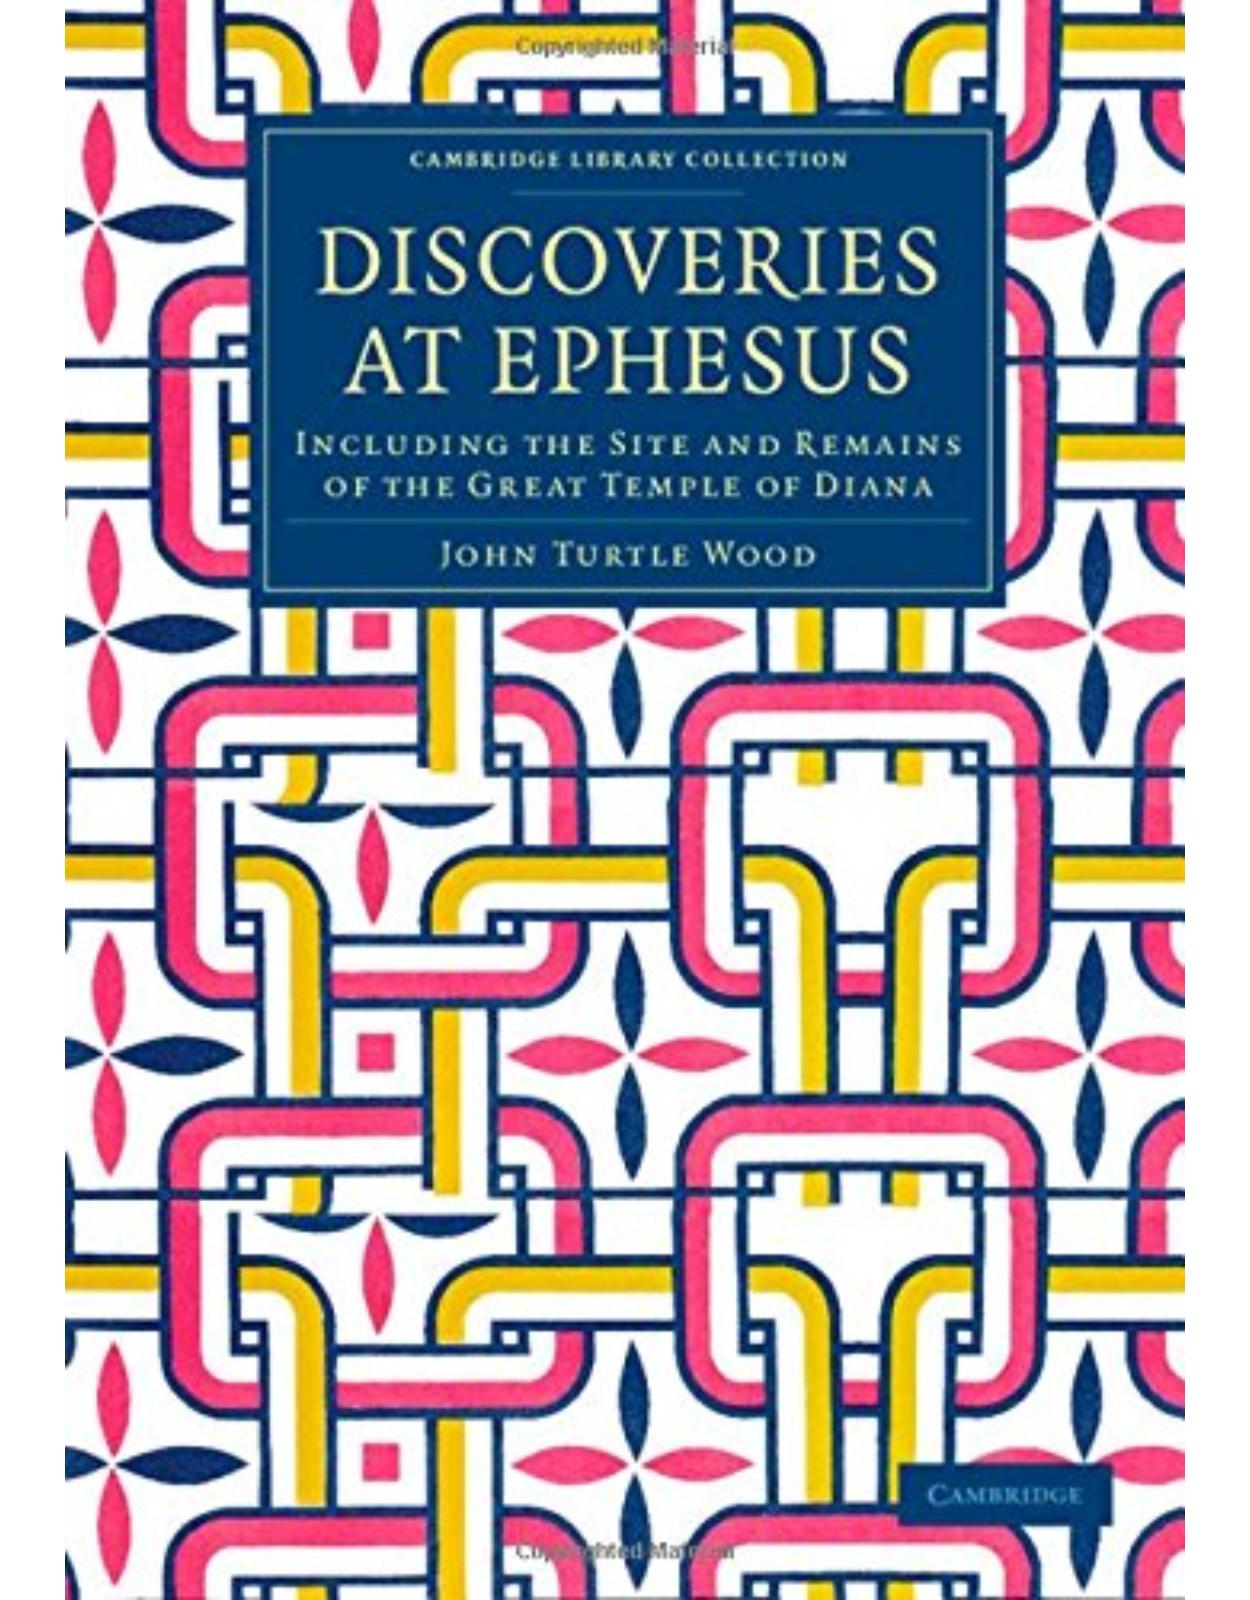 Discoveries at Ephesus: Including the Site and Remains of the Great Temple of Diana (Cambridge Library Collection - Archaeology)